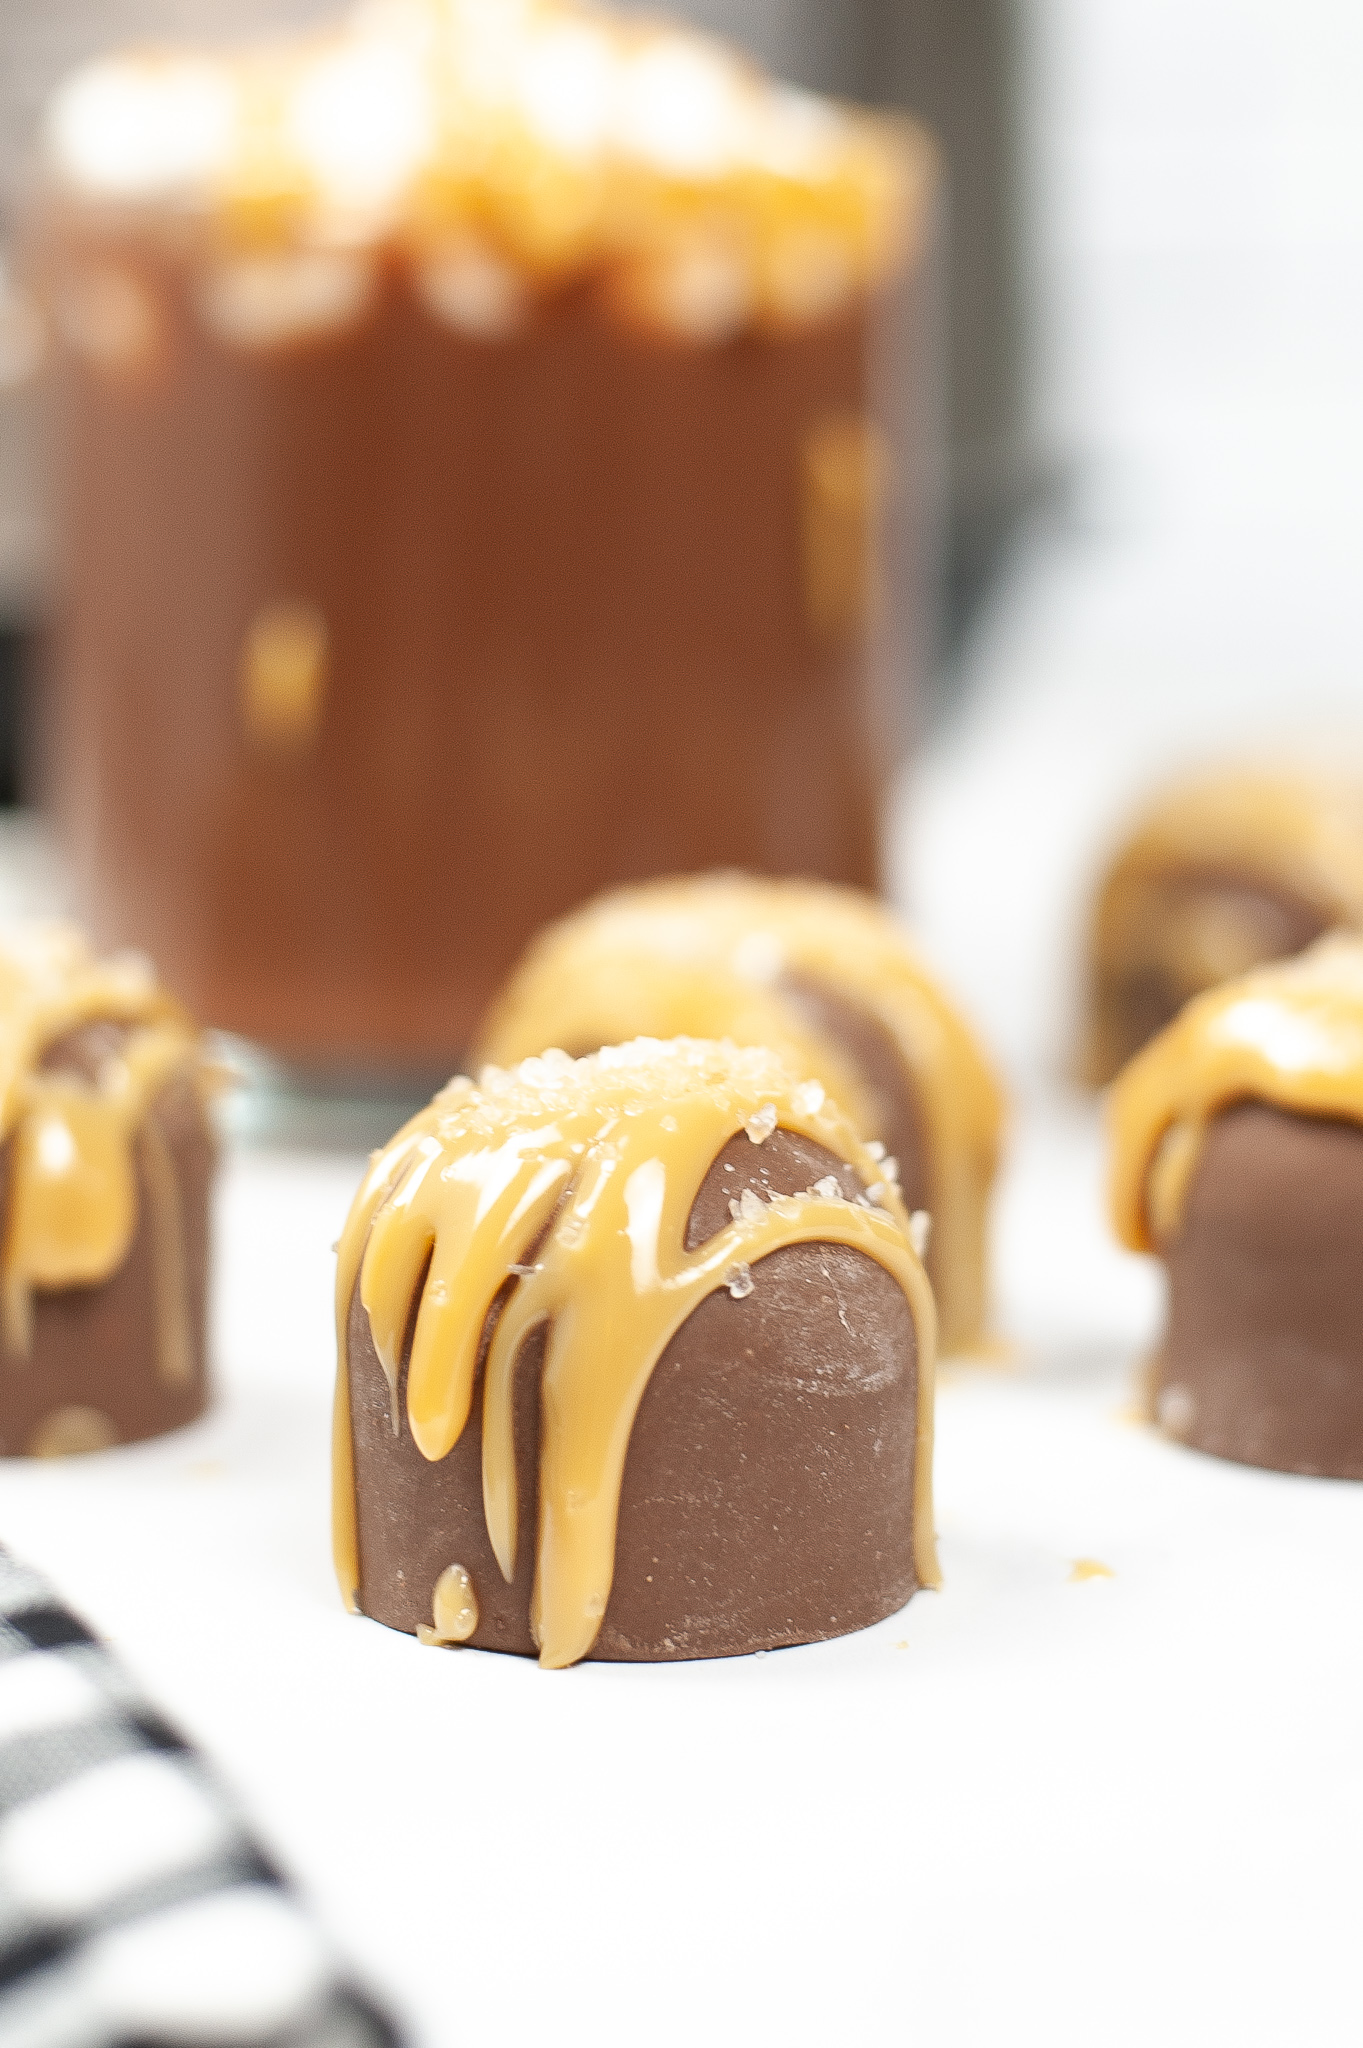 A tray on the salted caramel bombs.